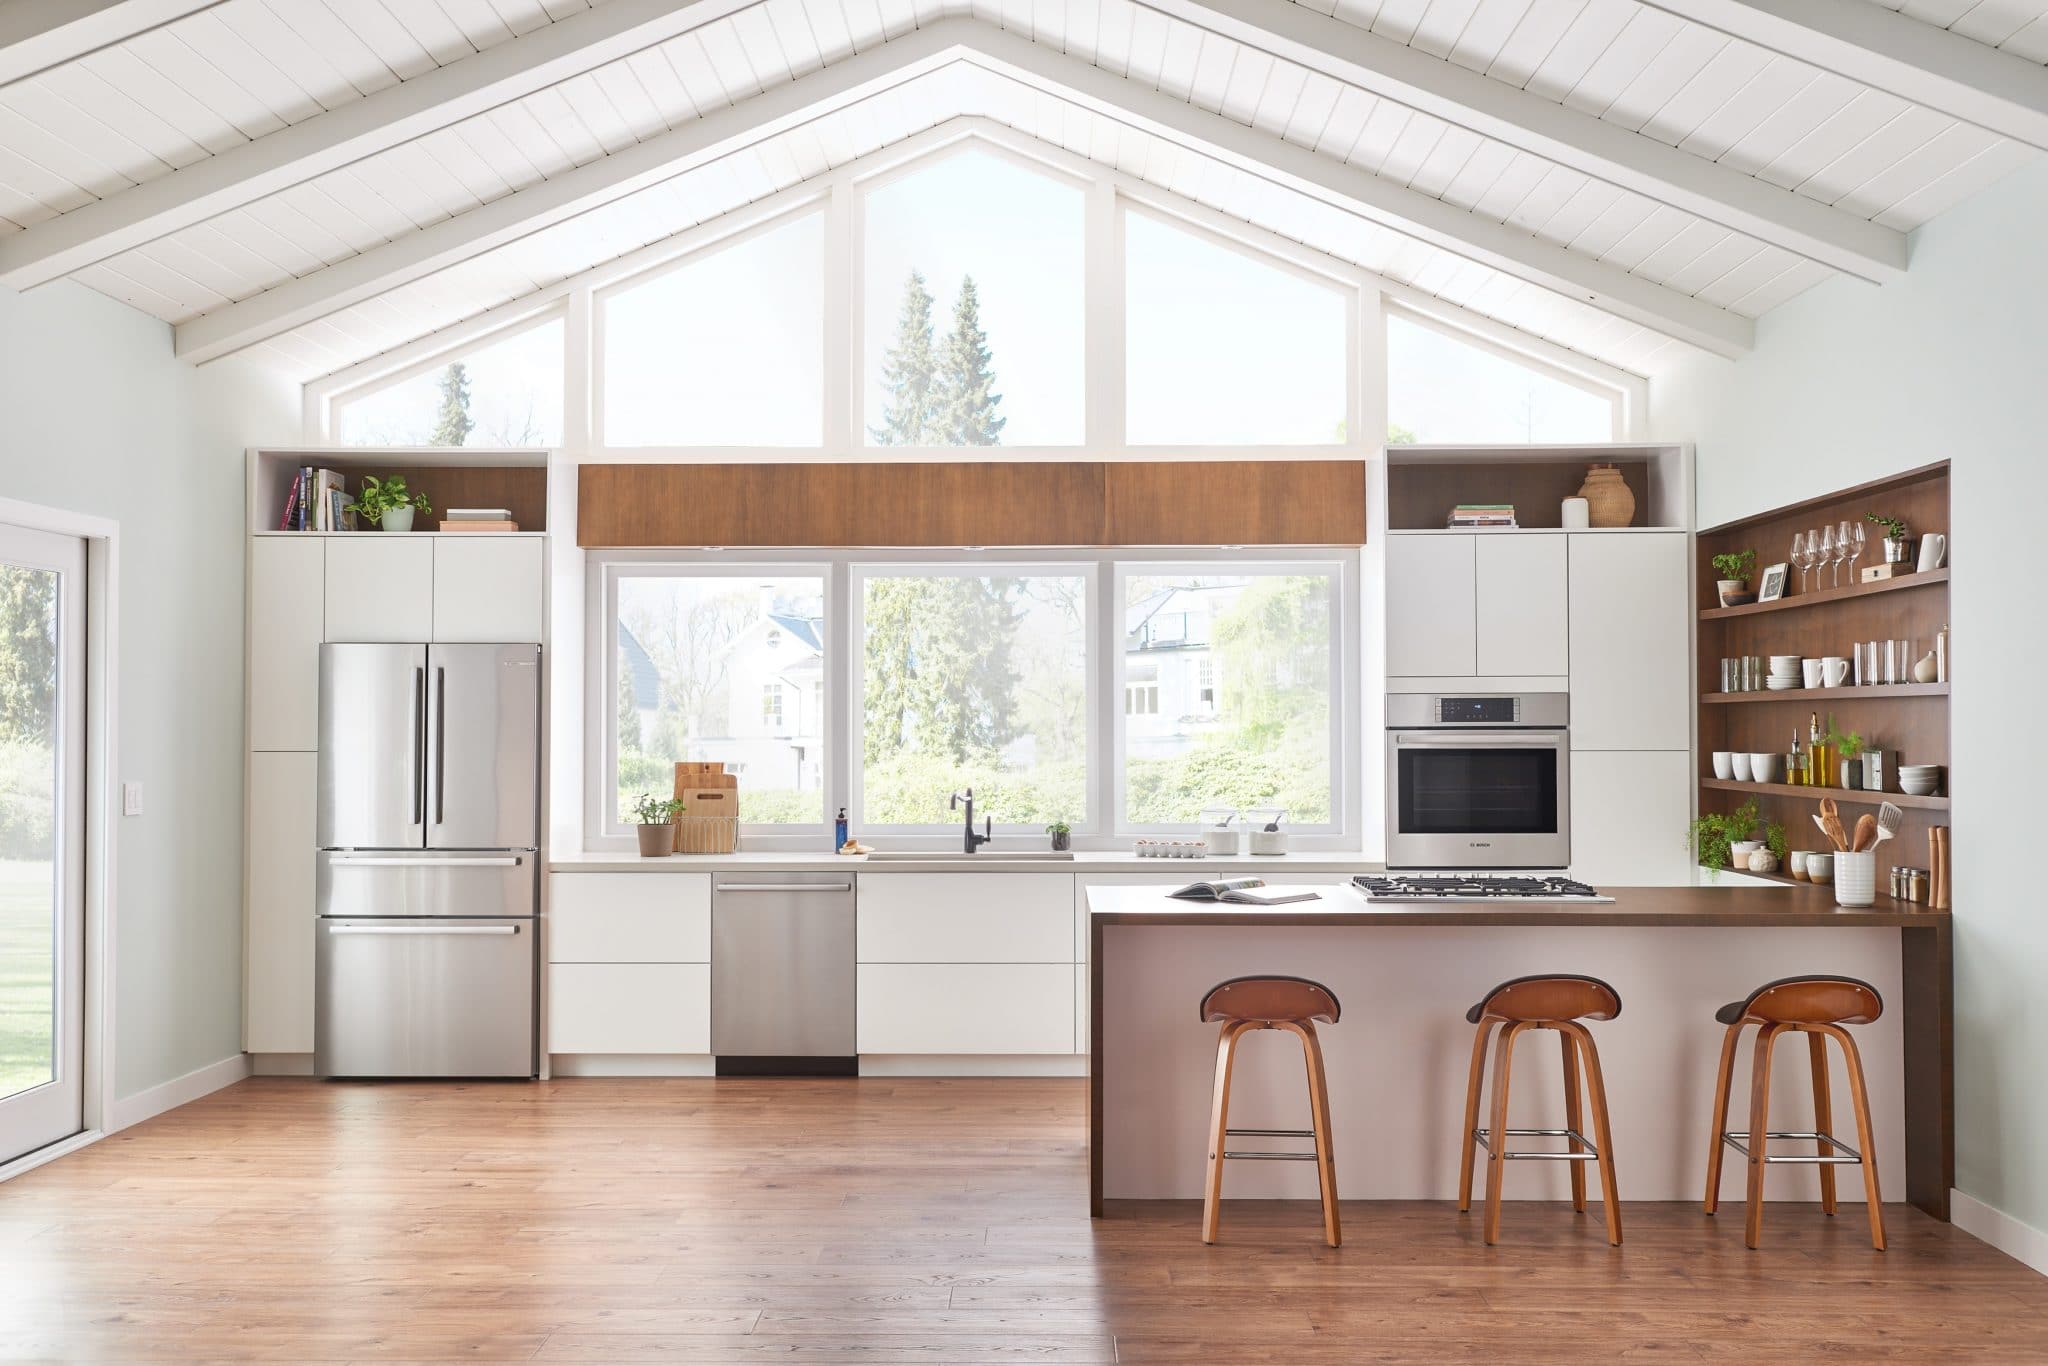 , Fresh by Design – Bosch Refrigeration Reinvented, Days of a Domestic Dad